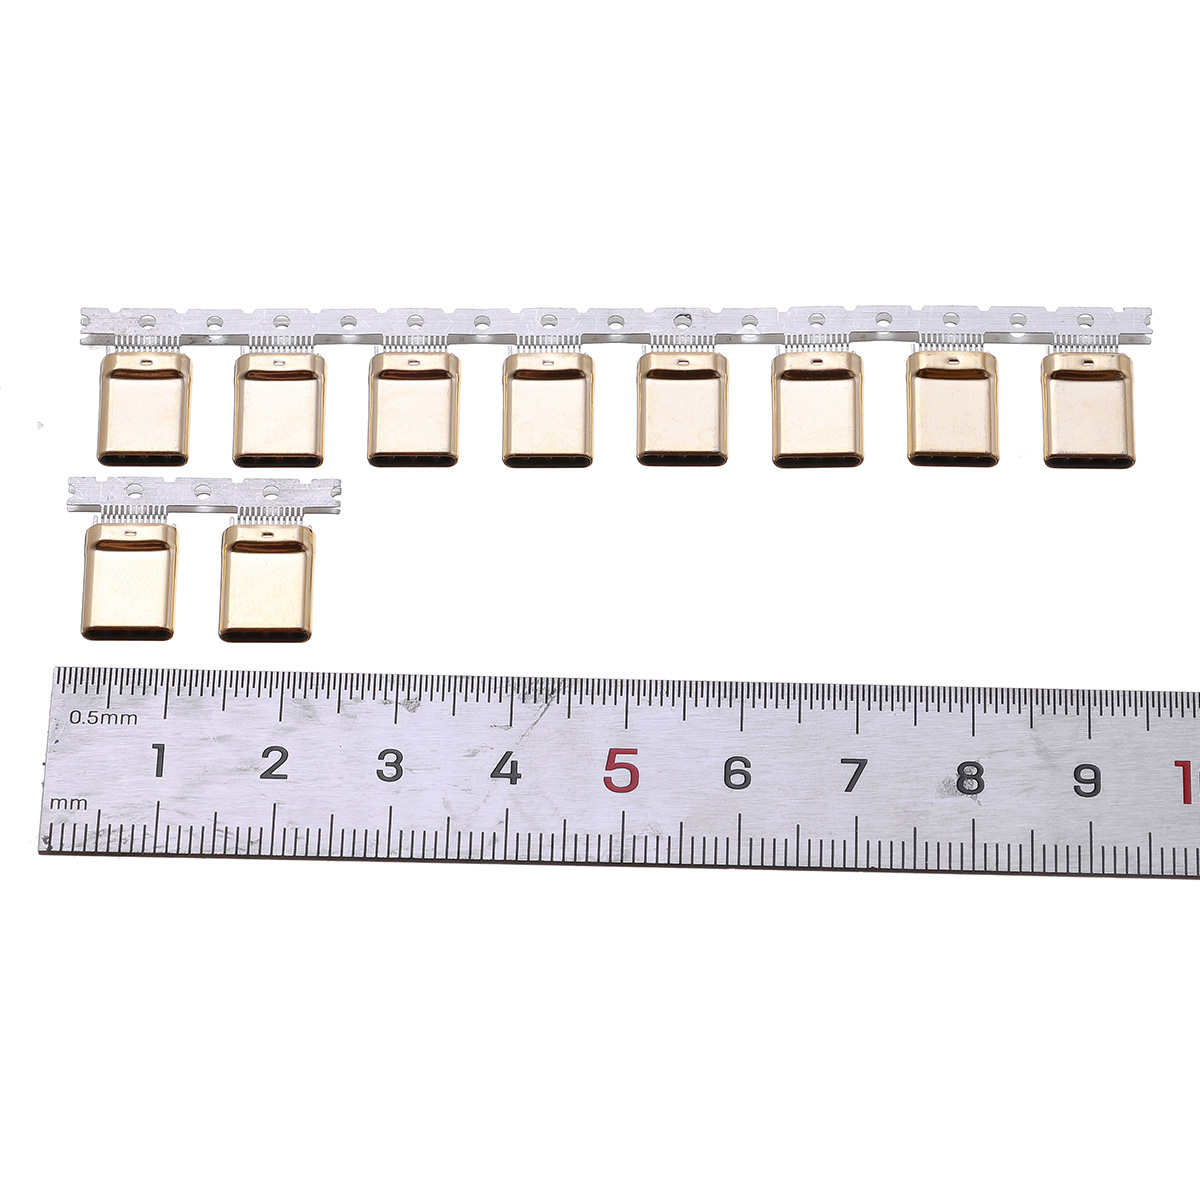 10PCS-31-TYPE-C-Stretch-Male-Shell-Full-Gold-Plated-1U-24P-Double-Sided-Splint-09-Card-Hook-Foot-L10-1845789-1